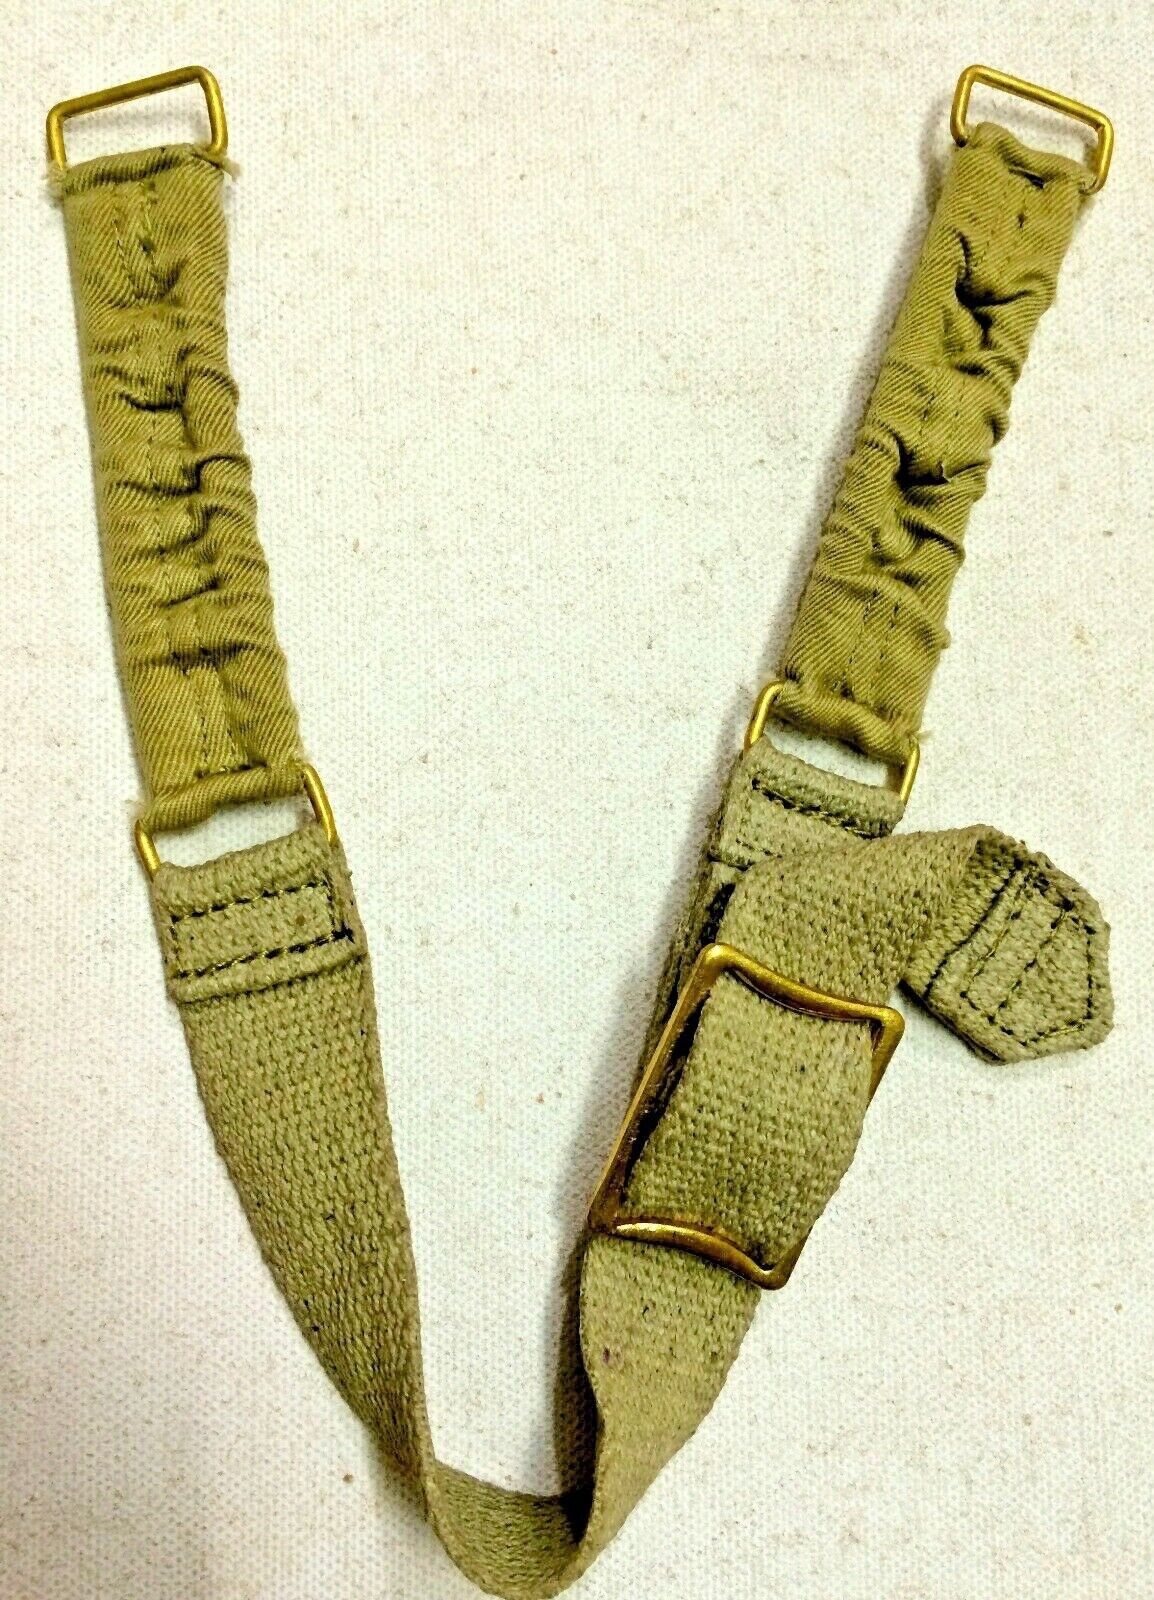 LOT of 10 WWII British Army Brodie Helmet Chin Strap - Repro x 10